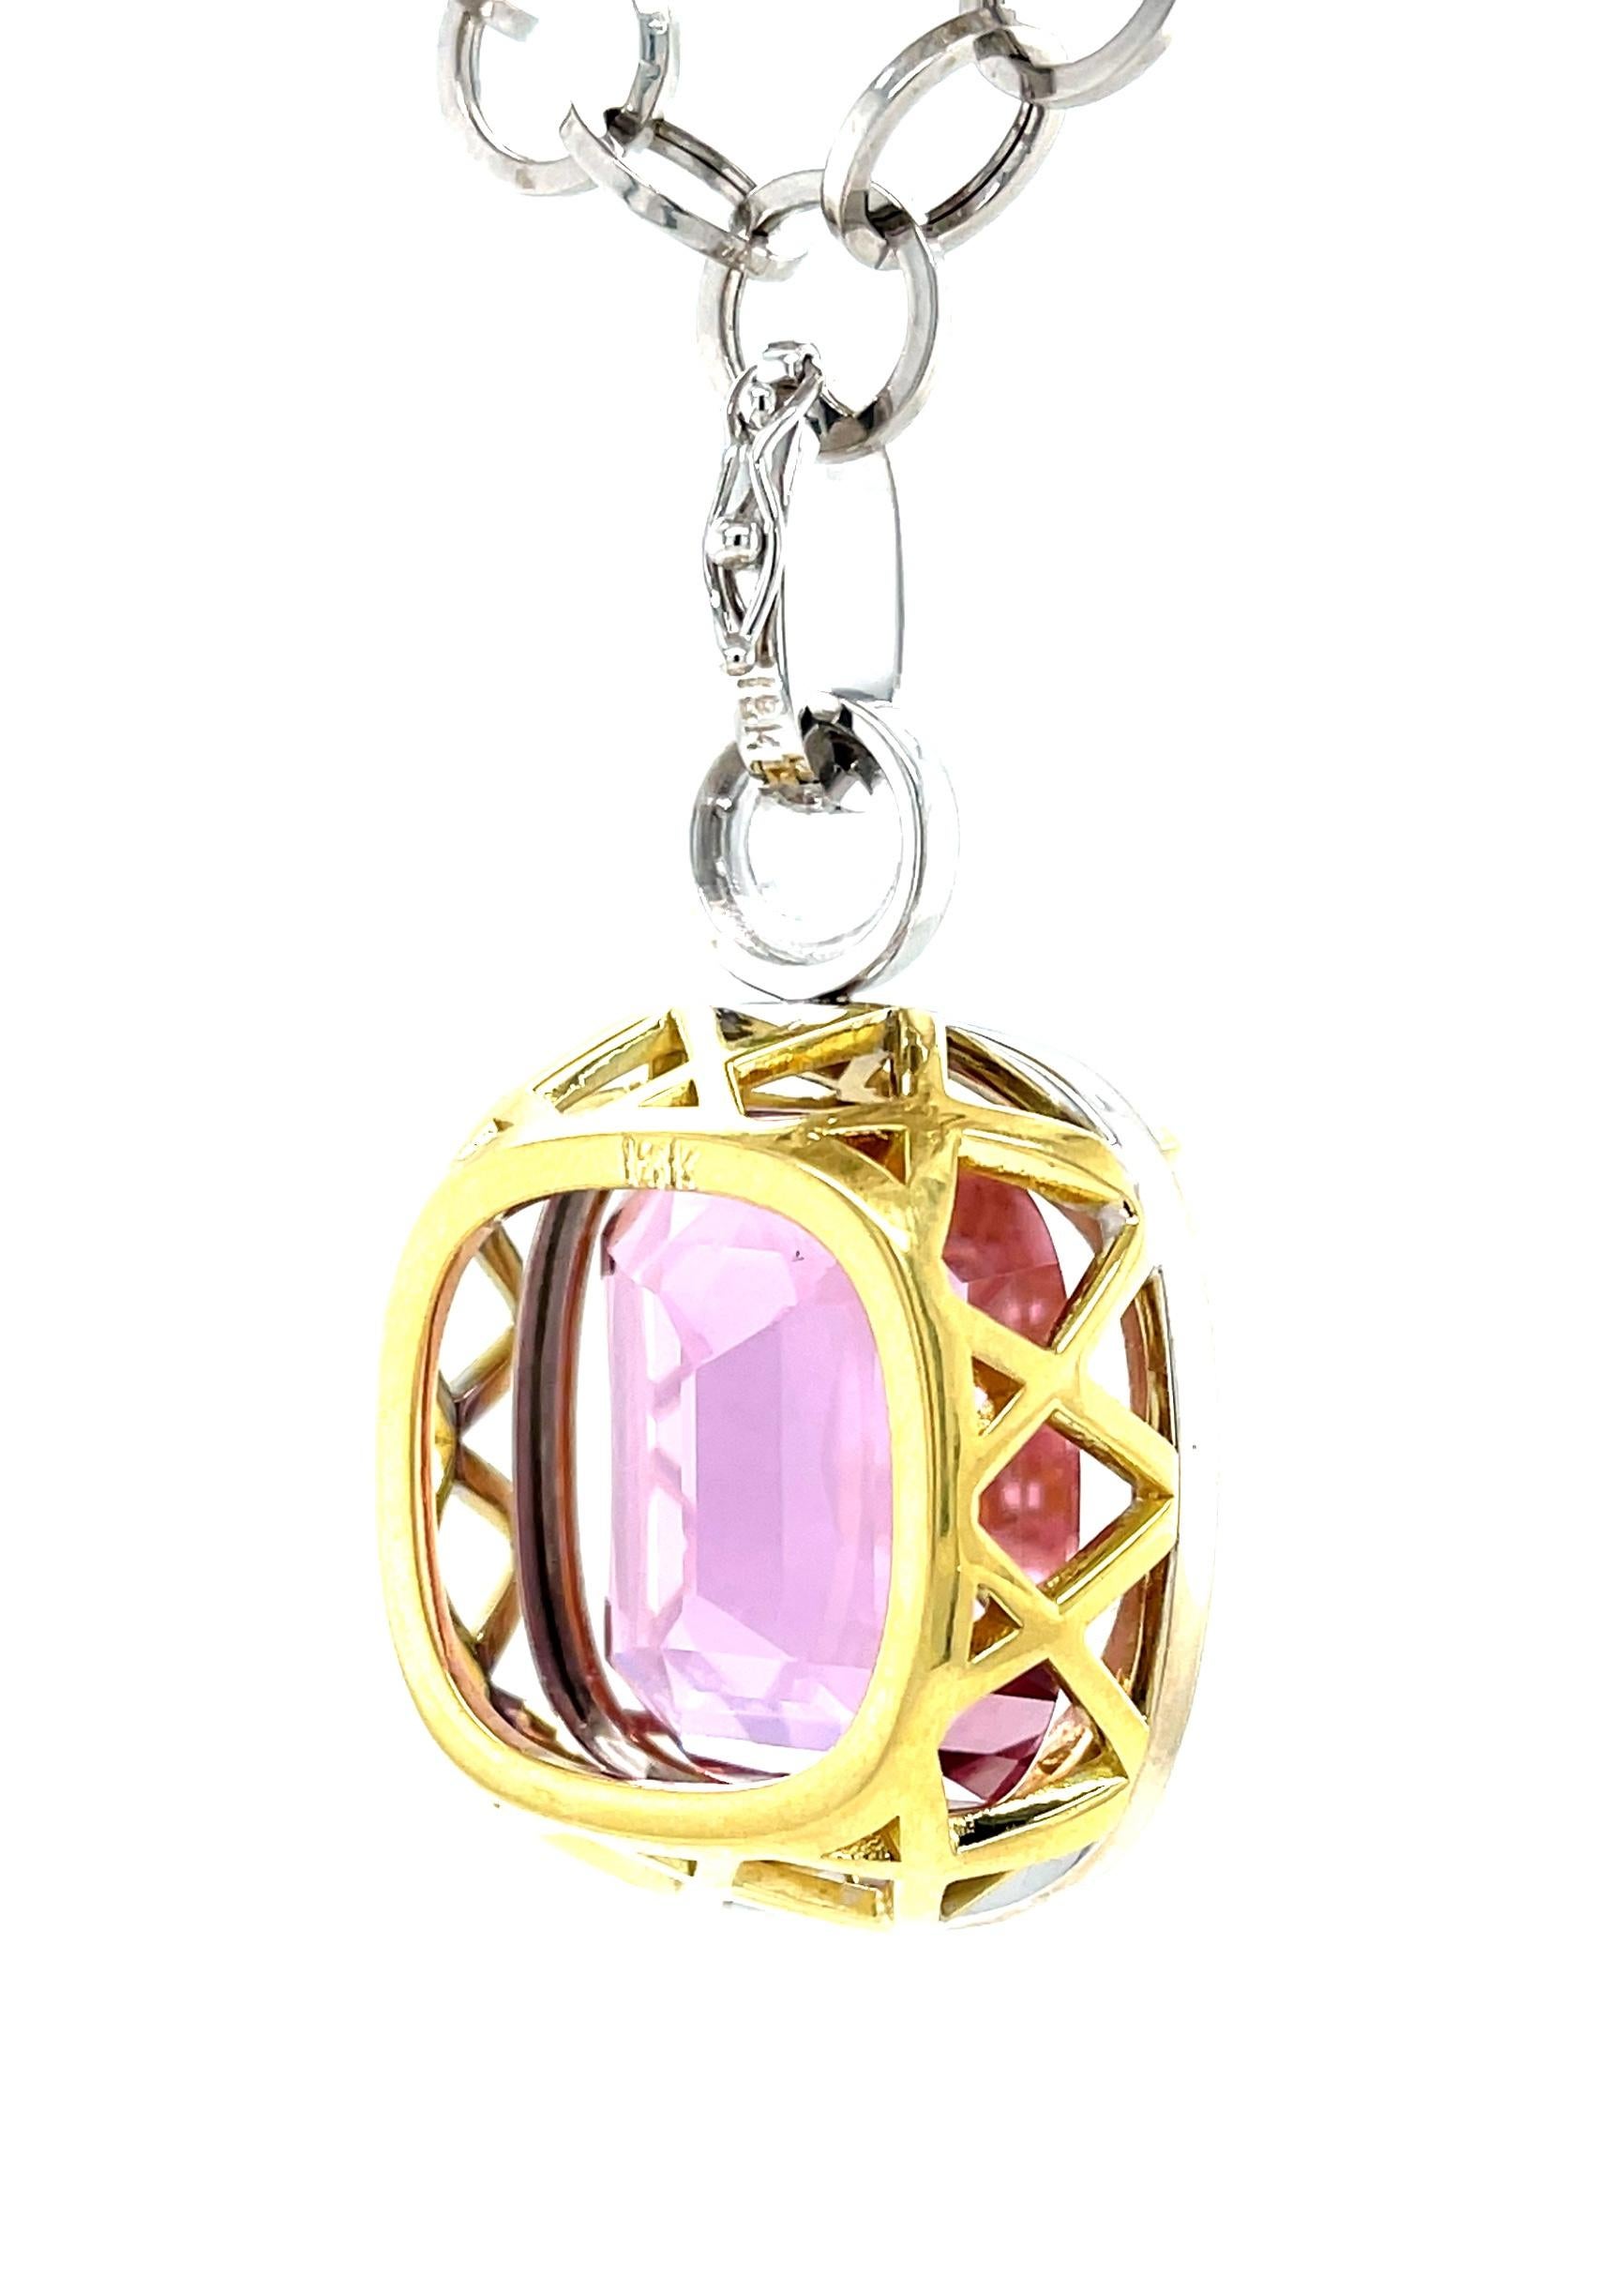 61.26 Carat Kunzite and Diamond Pendant Enhancer in 18k White and Yellow Gold For Sale 1